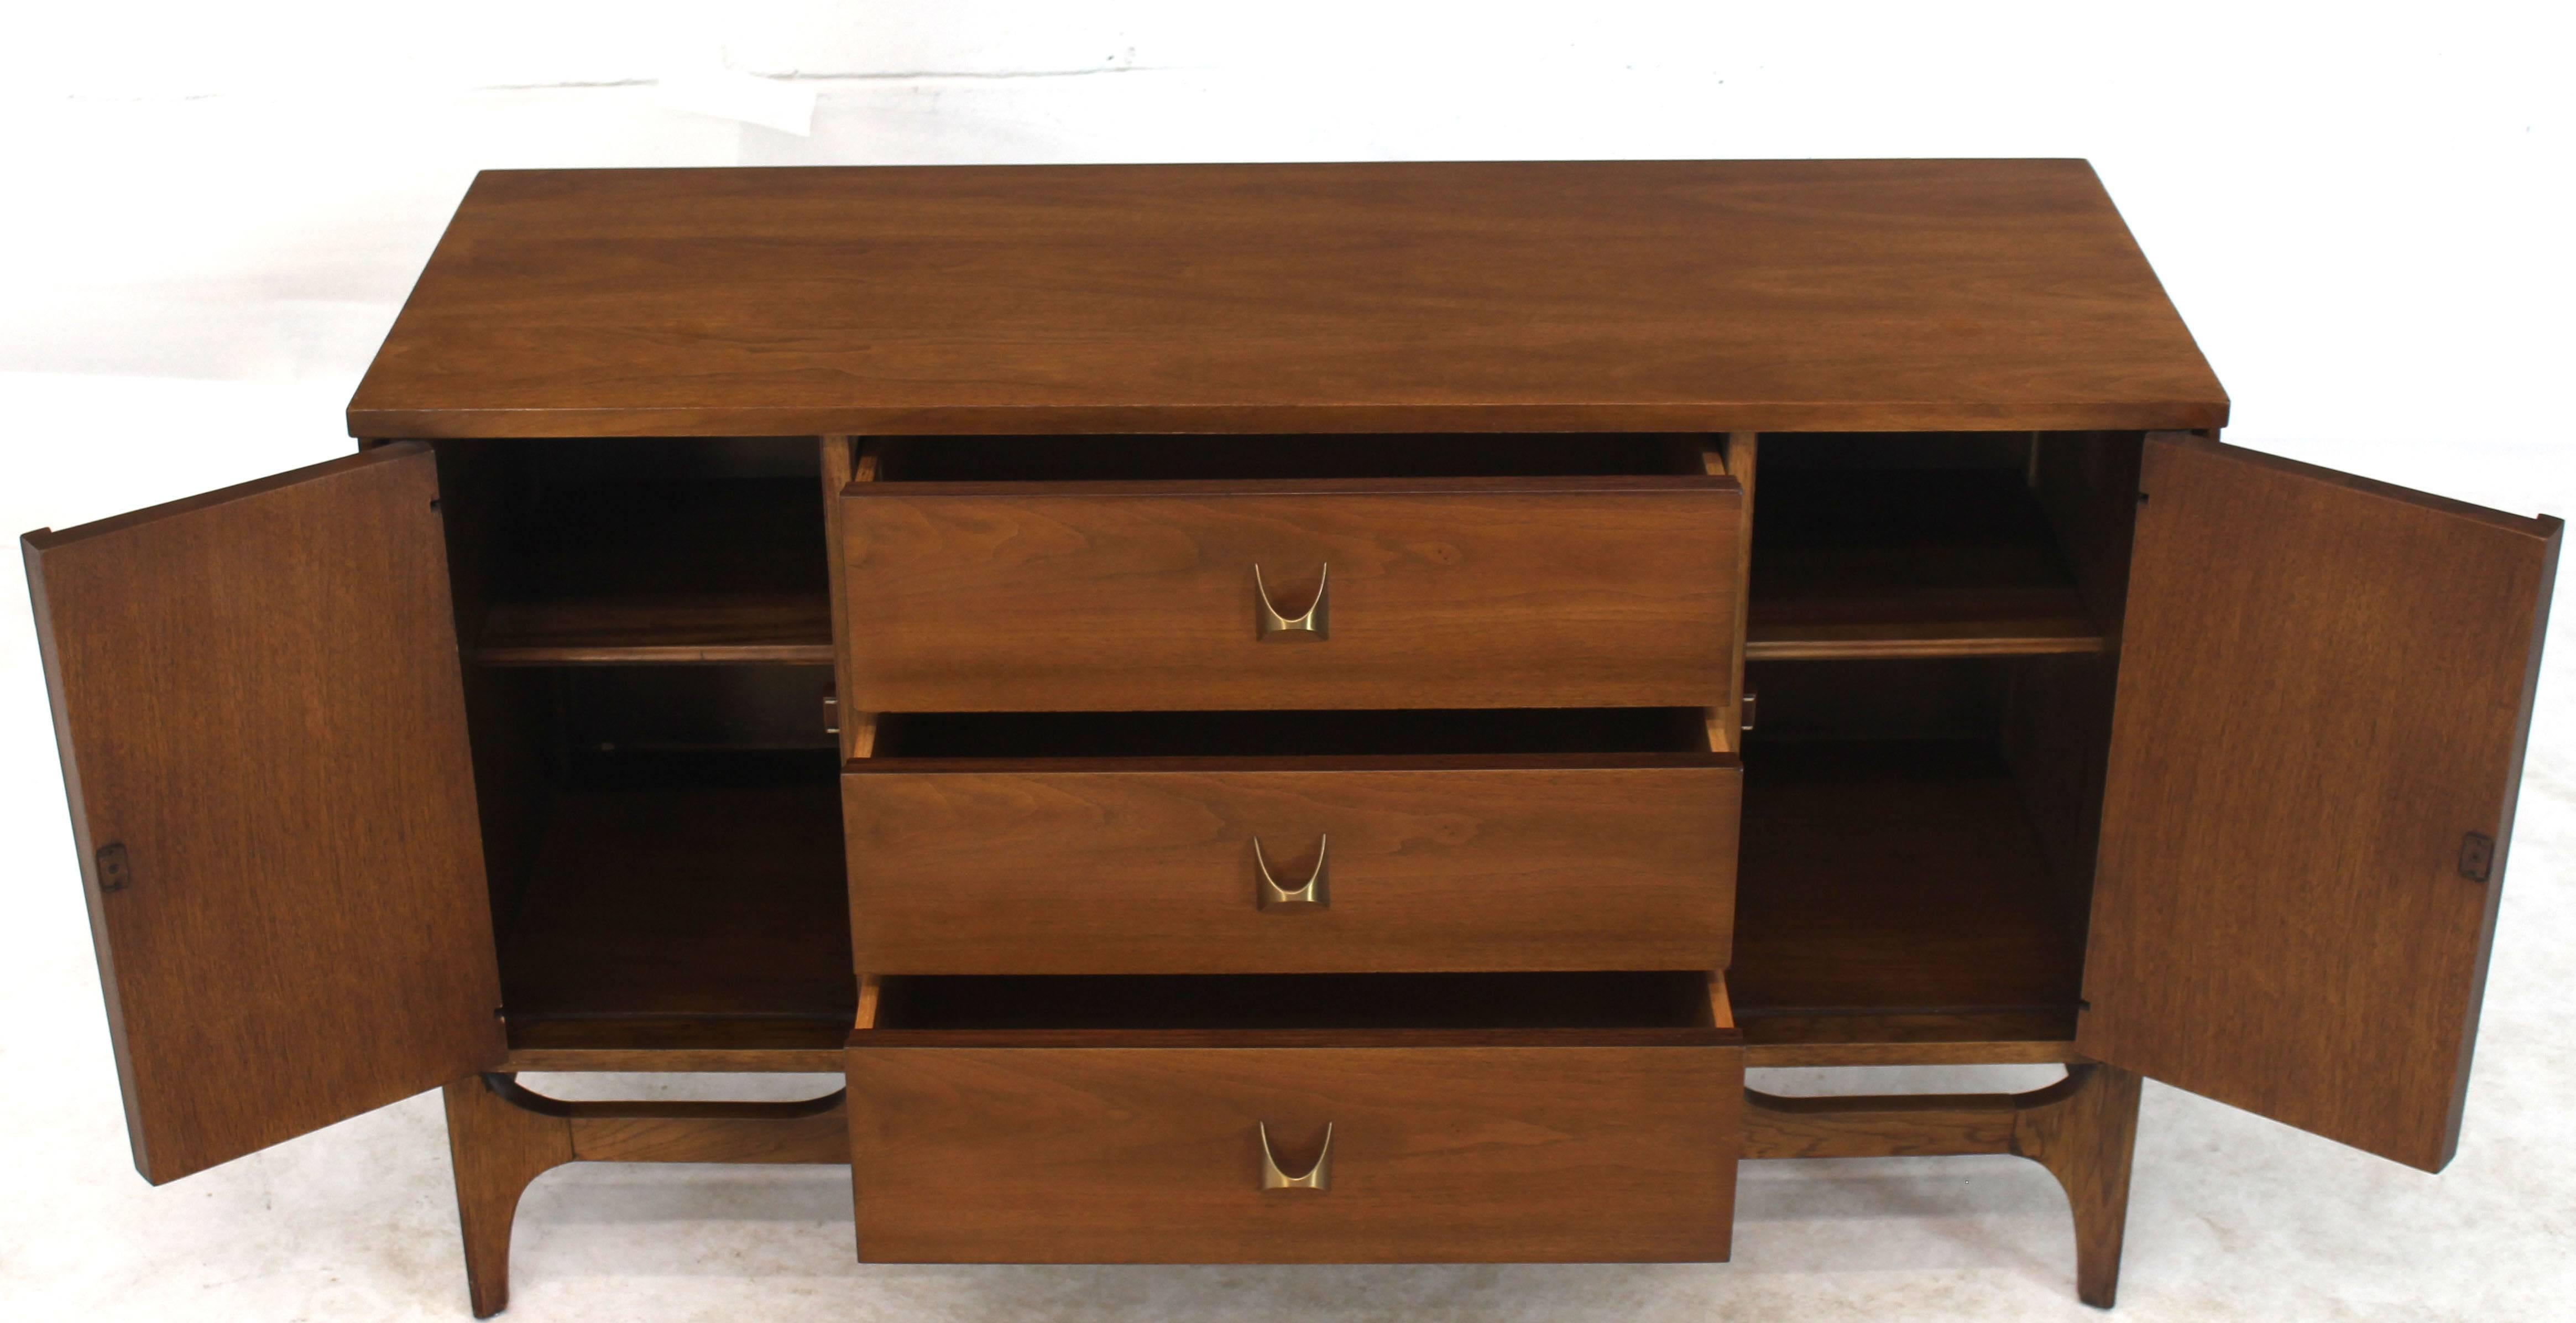 Lacquered Compact Walnut Dresser Sideboard with Molded Plywood Sculptural Elements 